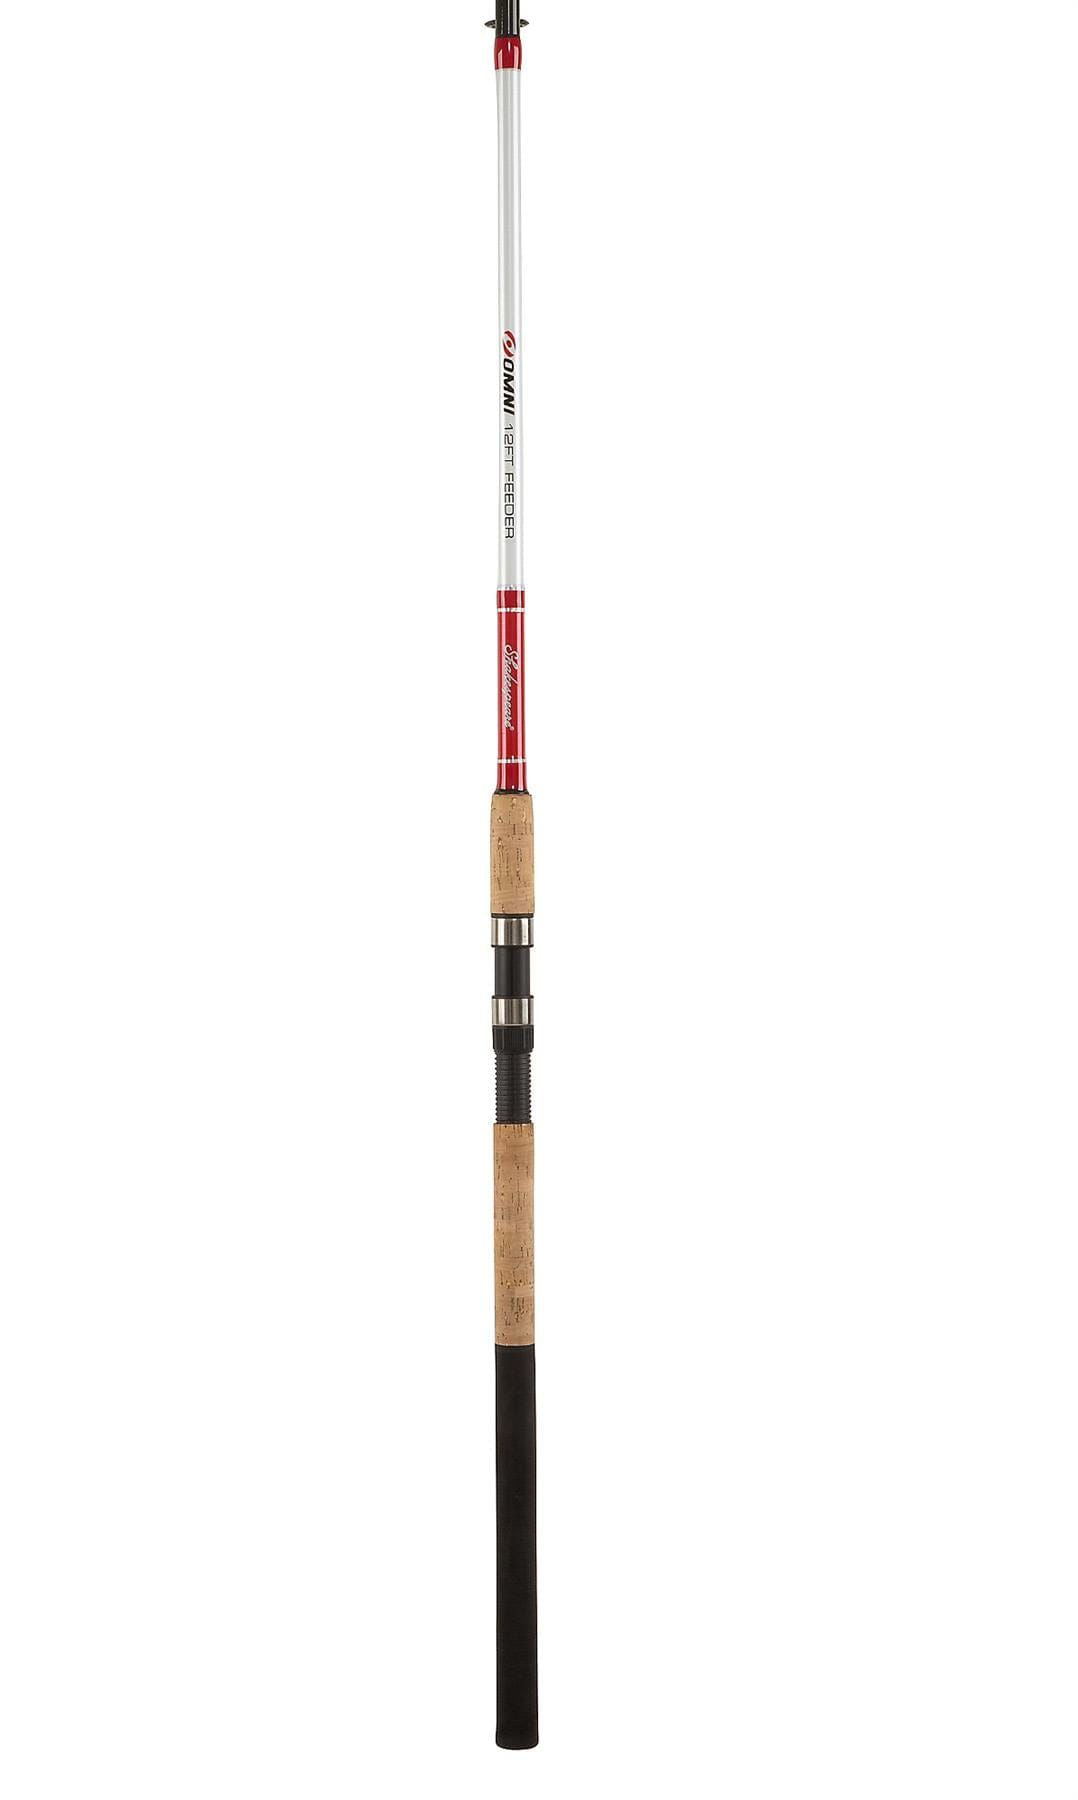 Shakespeare OMNI Carbon Feeder Rod incl 2 tips and transport bag